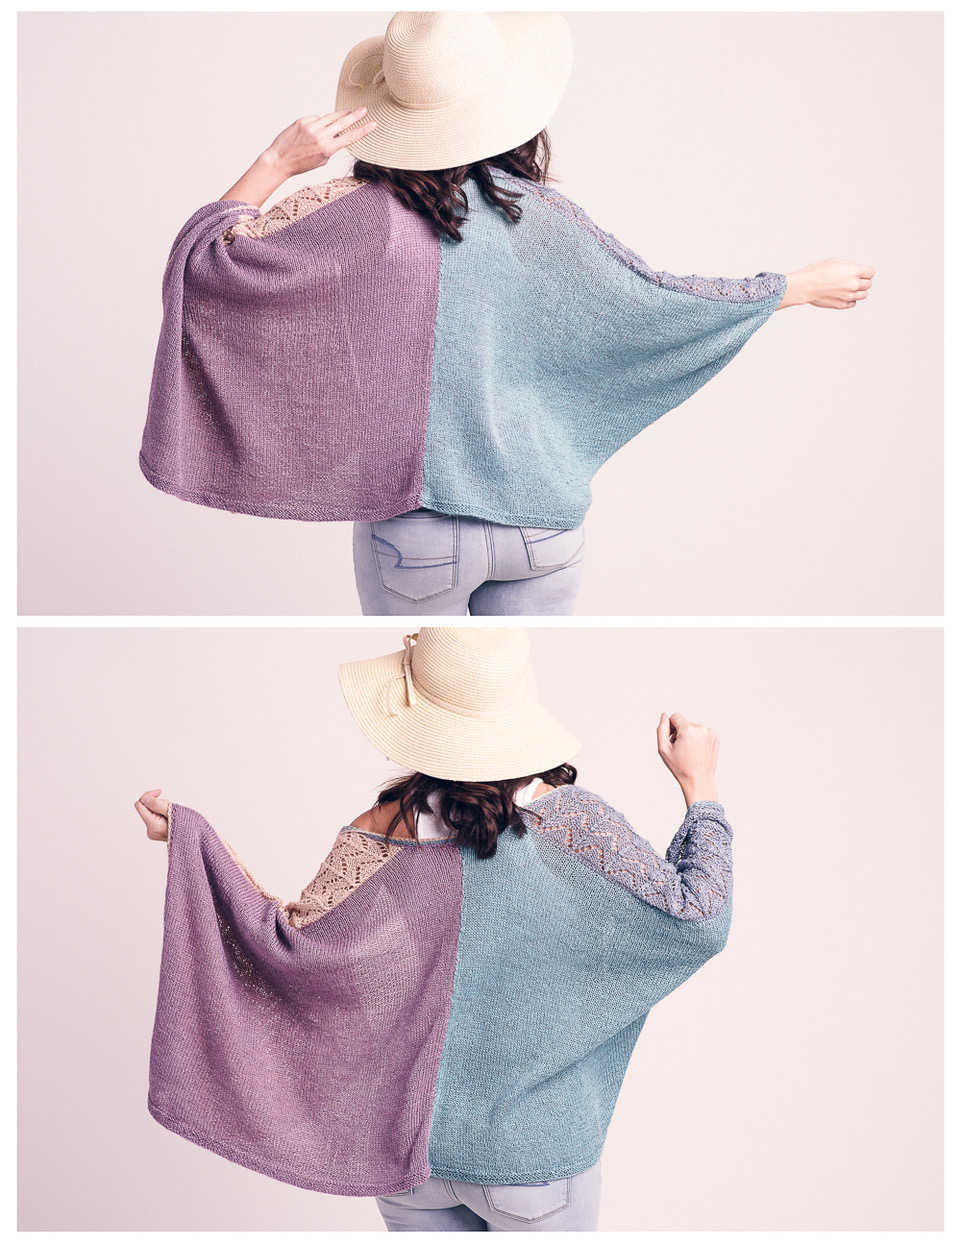 Beach Martinis knitted wrap sweater pattern